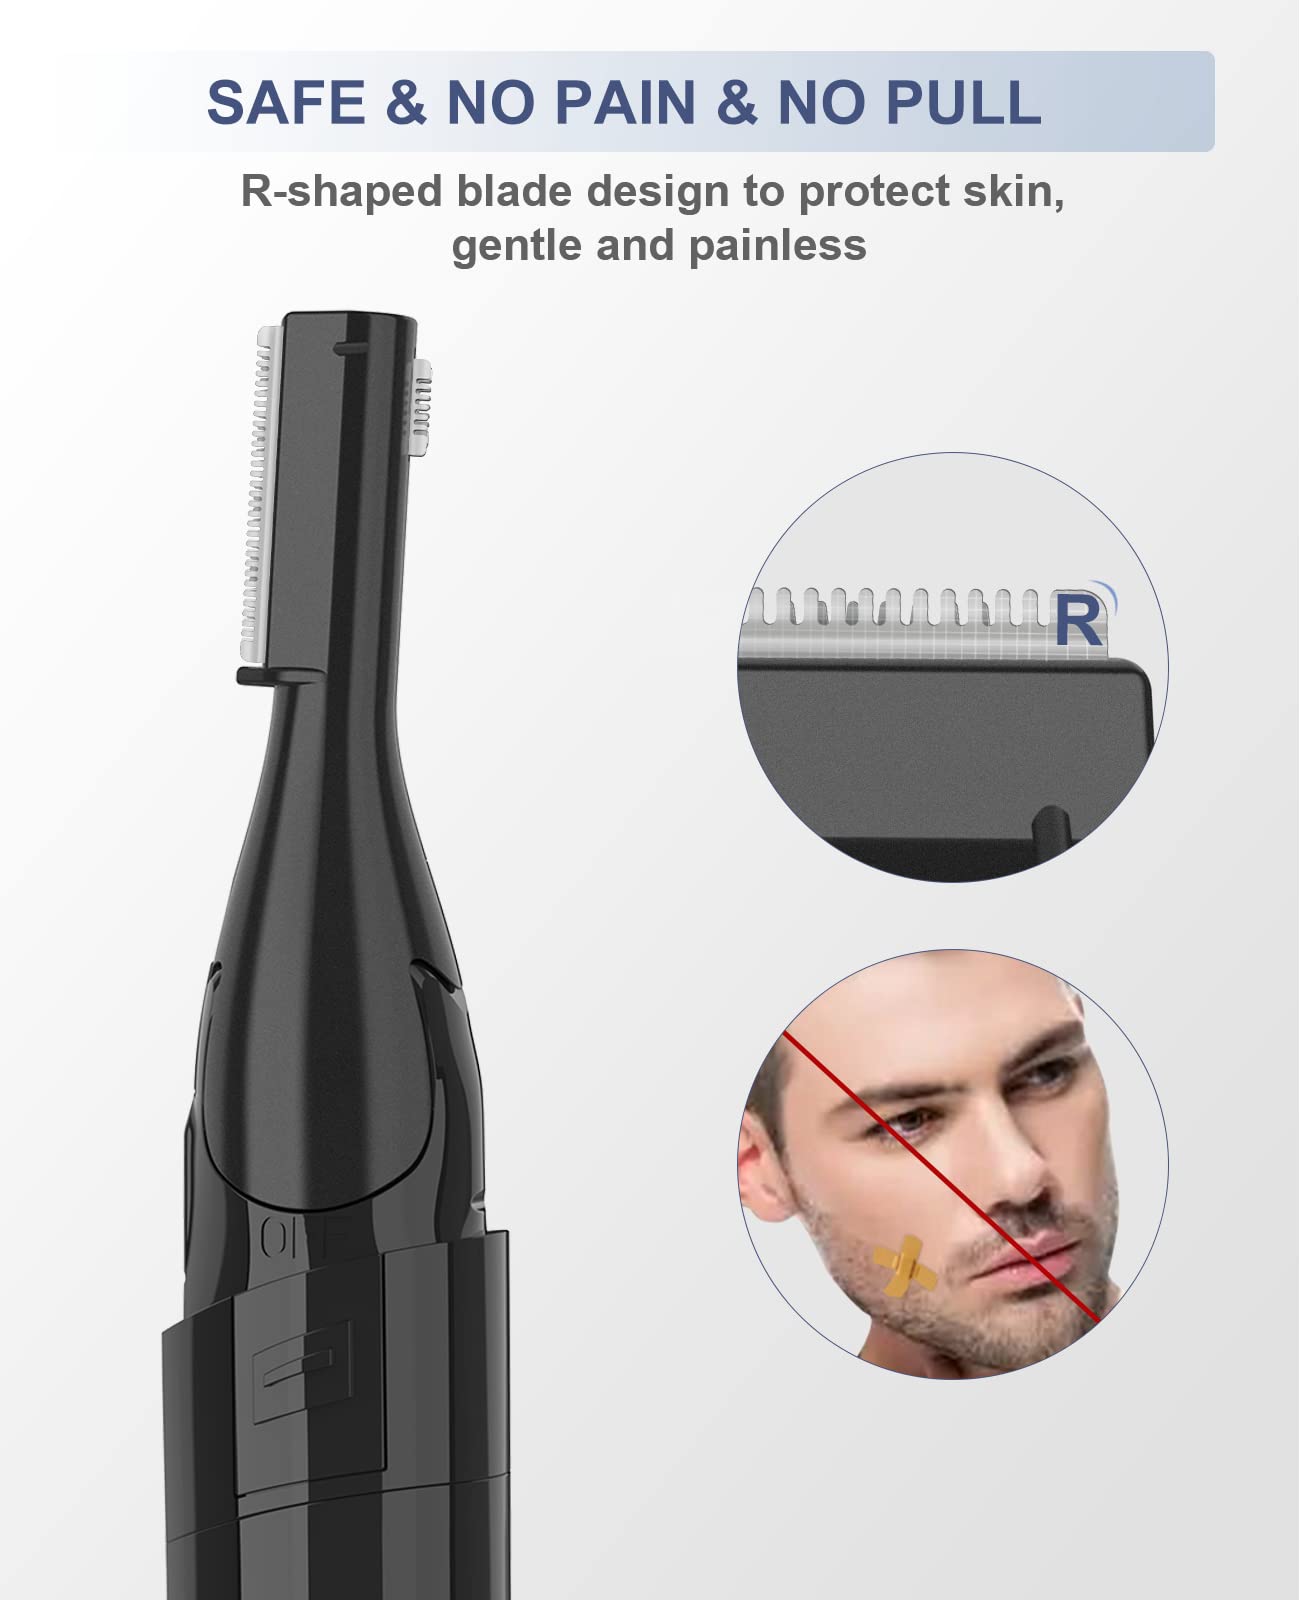 GAERUO Electric Eyebrow Trimmer, Painless Portable Eyebrow Shaper Trimmer Kit for Women Men, Eyebrow Hair Trimmer with Battery for Face Lips Armpit Leg Body